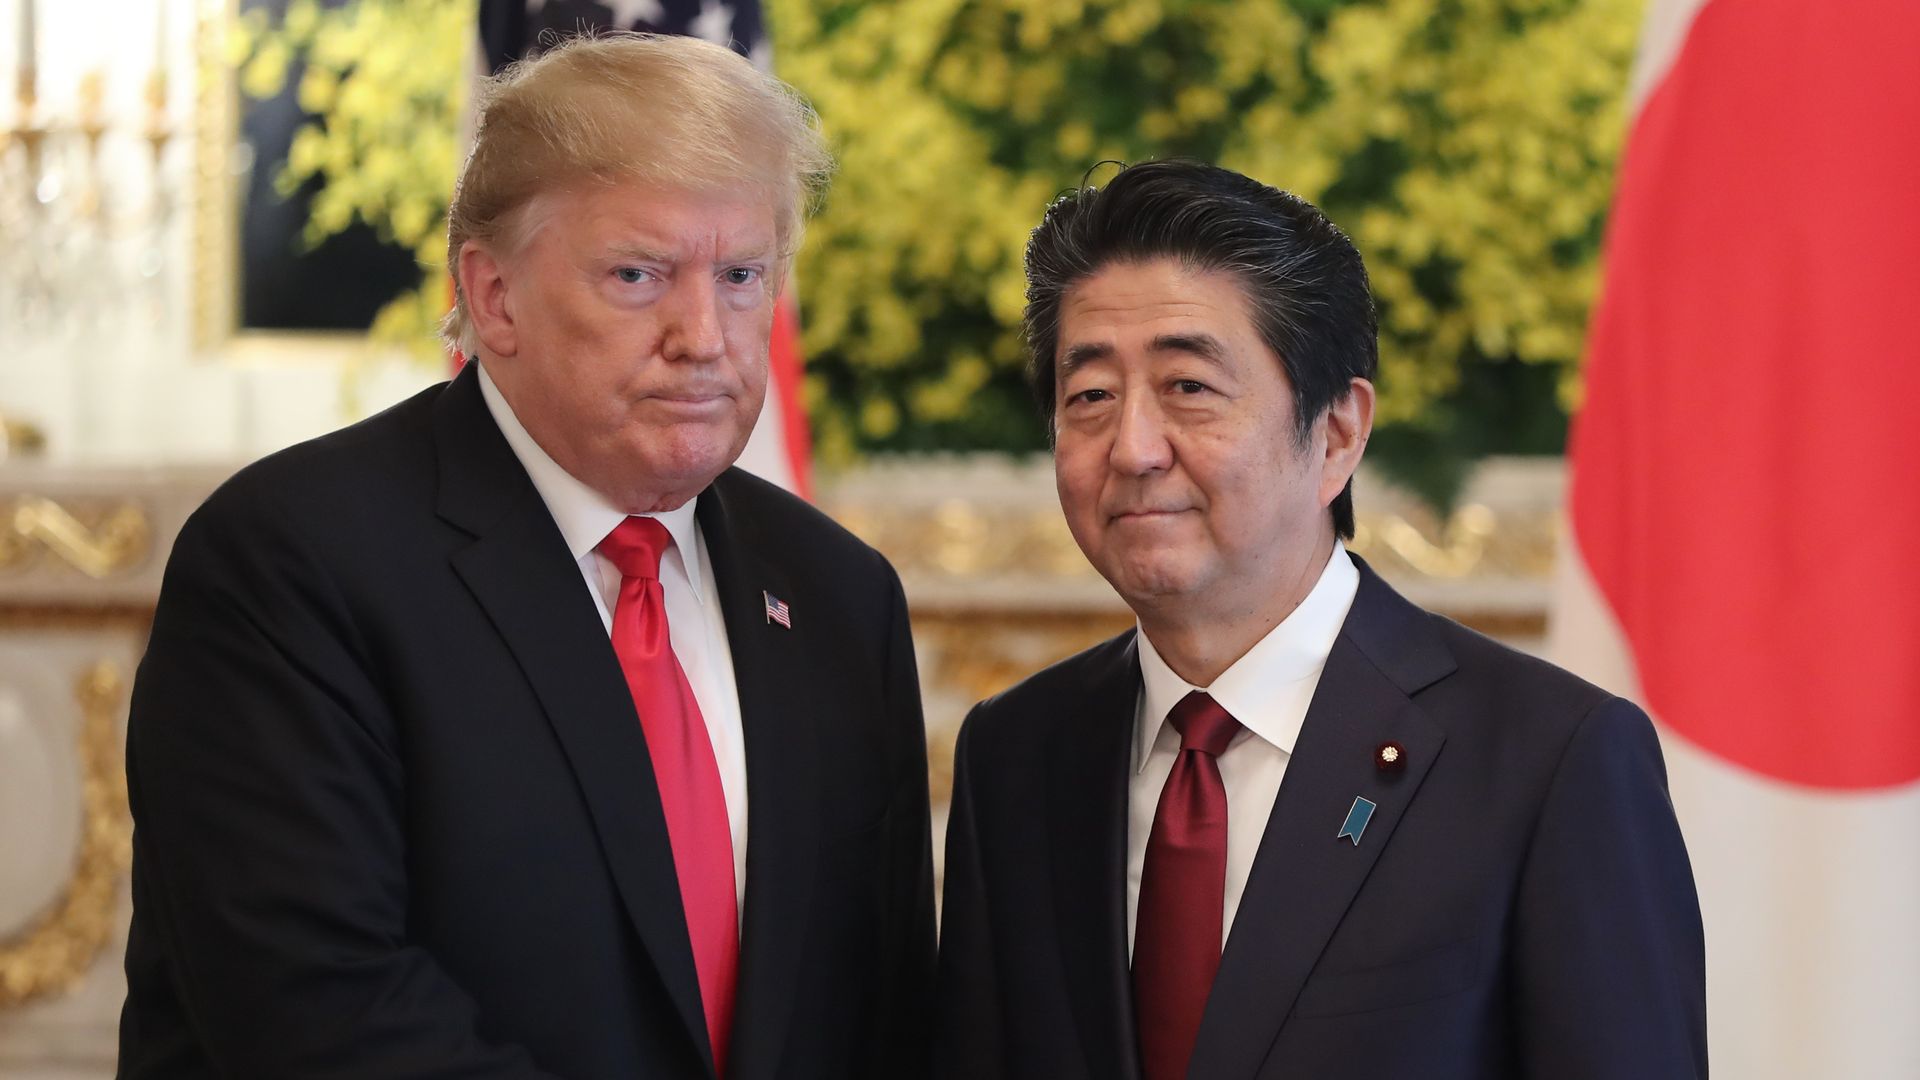 President Donald Trump shakes hands with Japan's Prime Minister Shinzo Abe (R) after their bilateral meeting at Akasaka Palace in Tokyo.